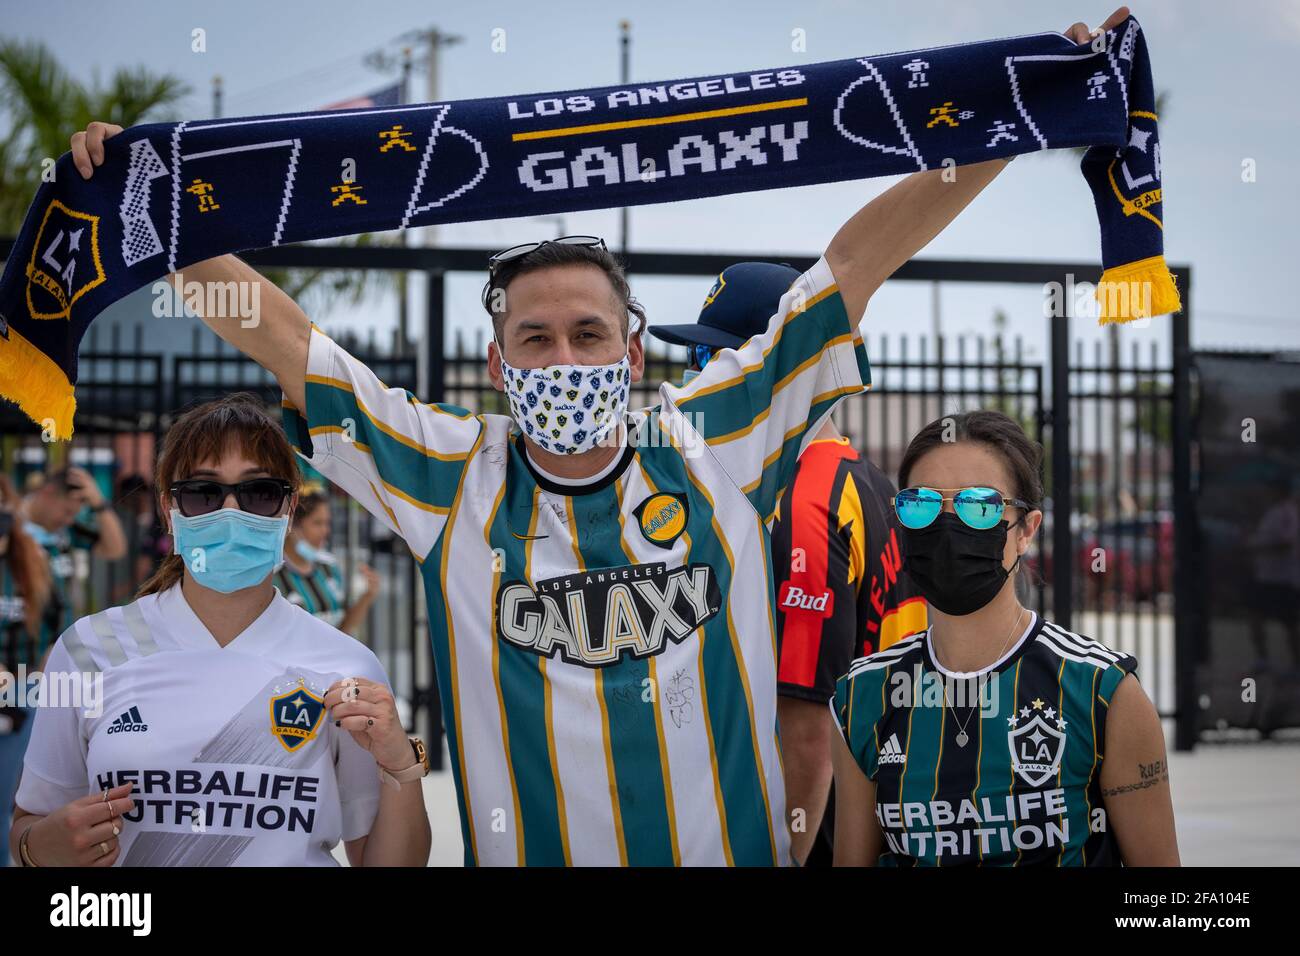 Fort Lauderdale, Florida, USA - April 18, 2021: LA Galaxy soccer fans cheering on their team during a soccer match at MLS 2021 in DRV Pink Stadium. Stock Photo